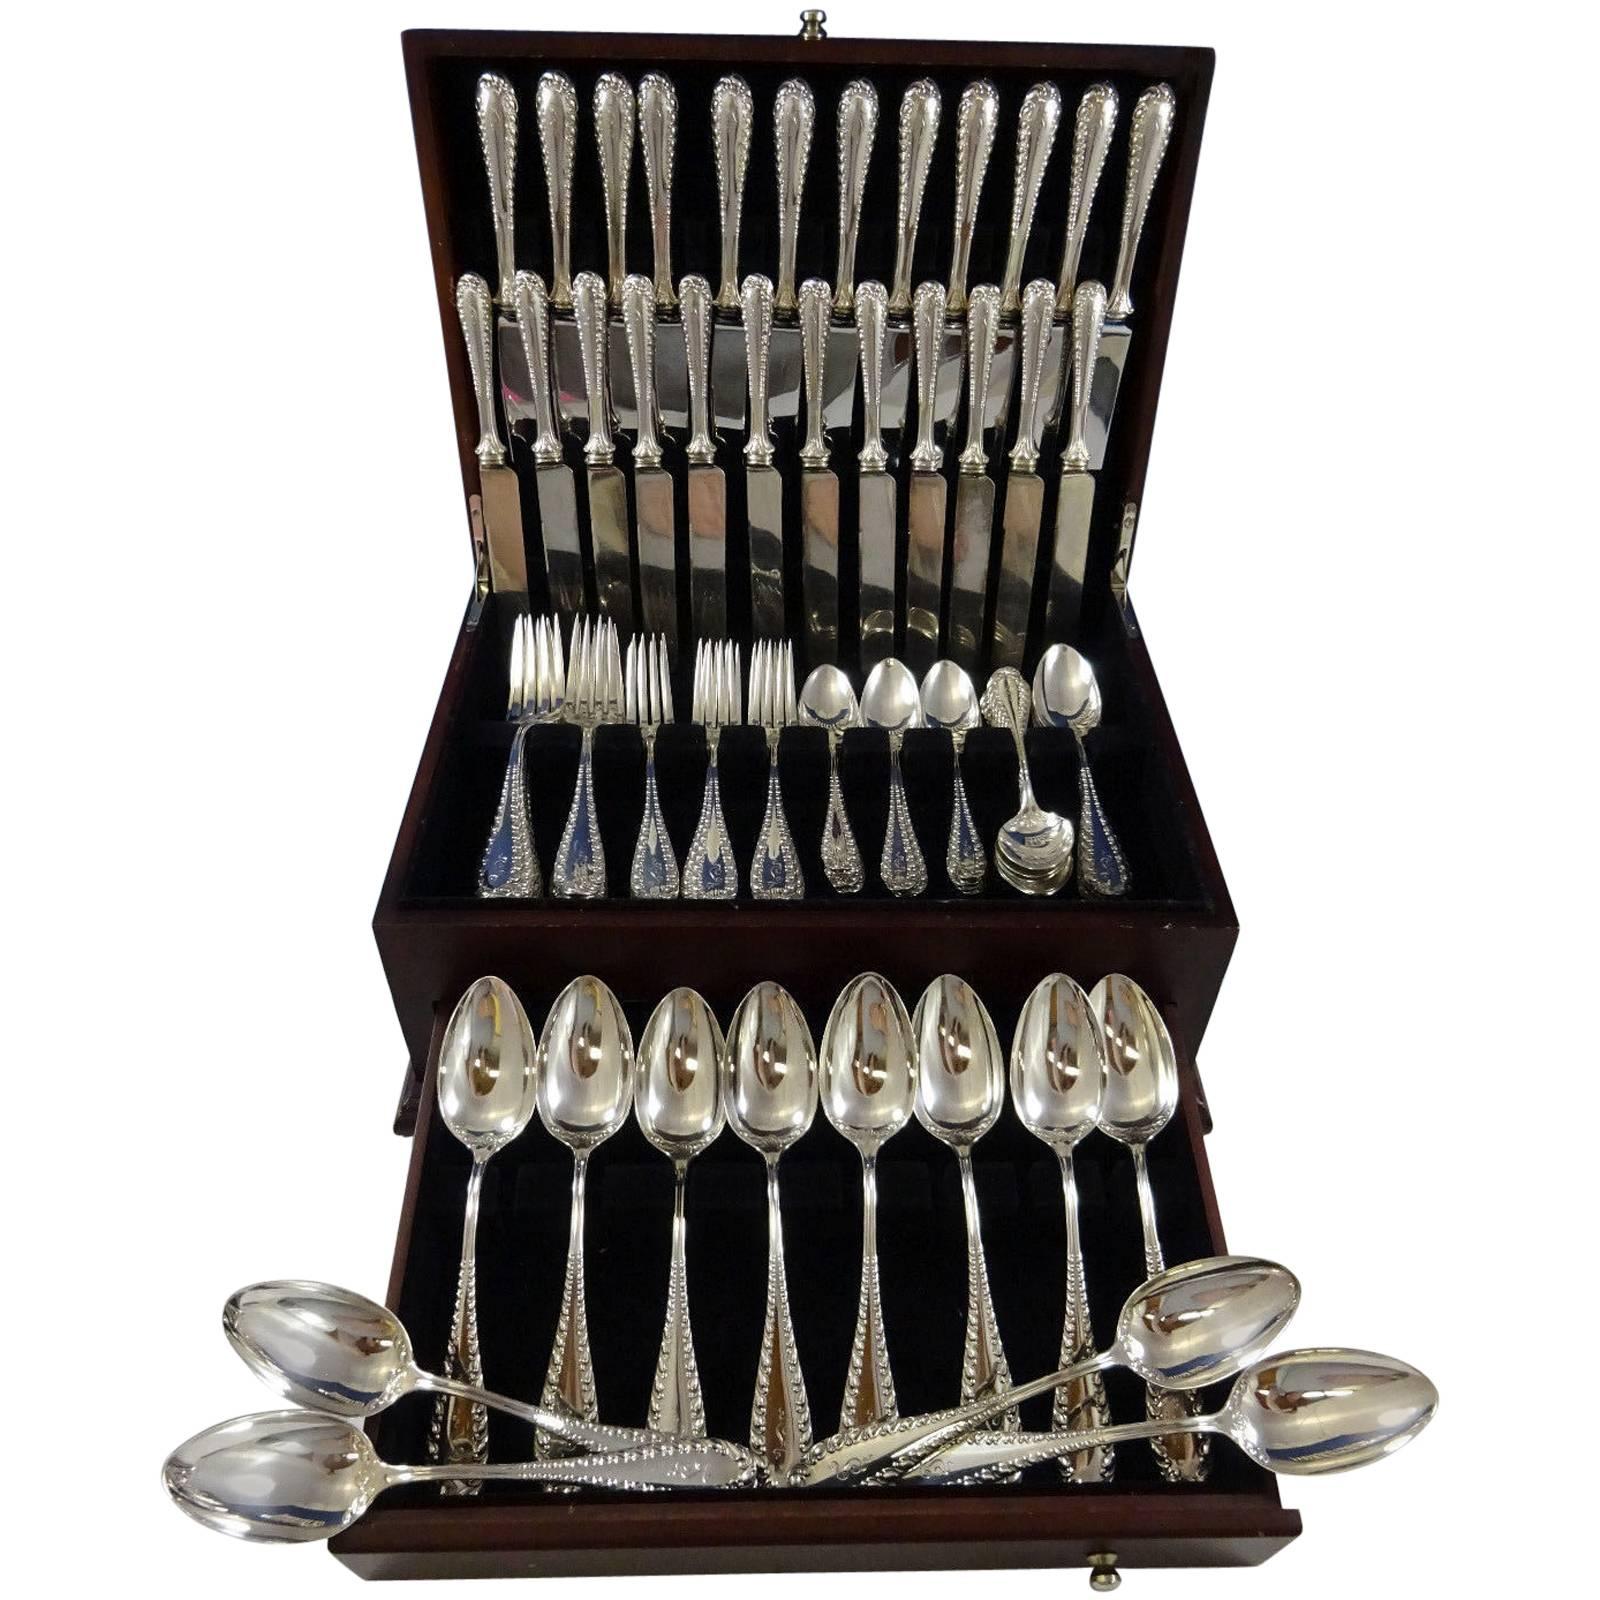 Rare Victoria by Shiebler circa 1894 sterling silver dinner and luncheon flatware set of 84 pieces. This set includes:

12 dinner size knives, French blades, 9 7/8